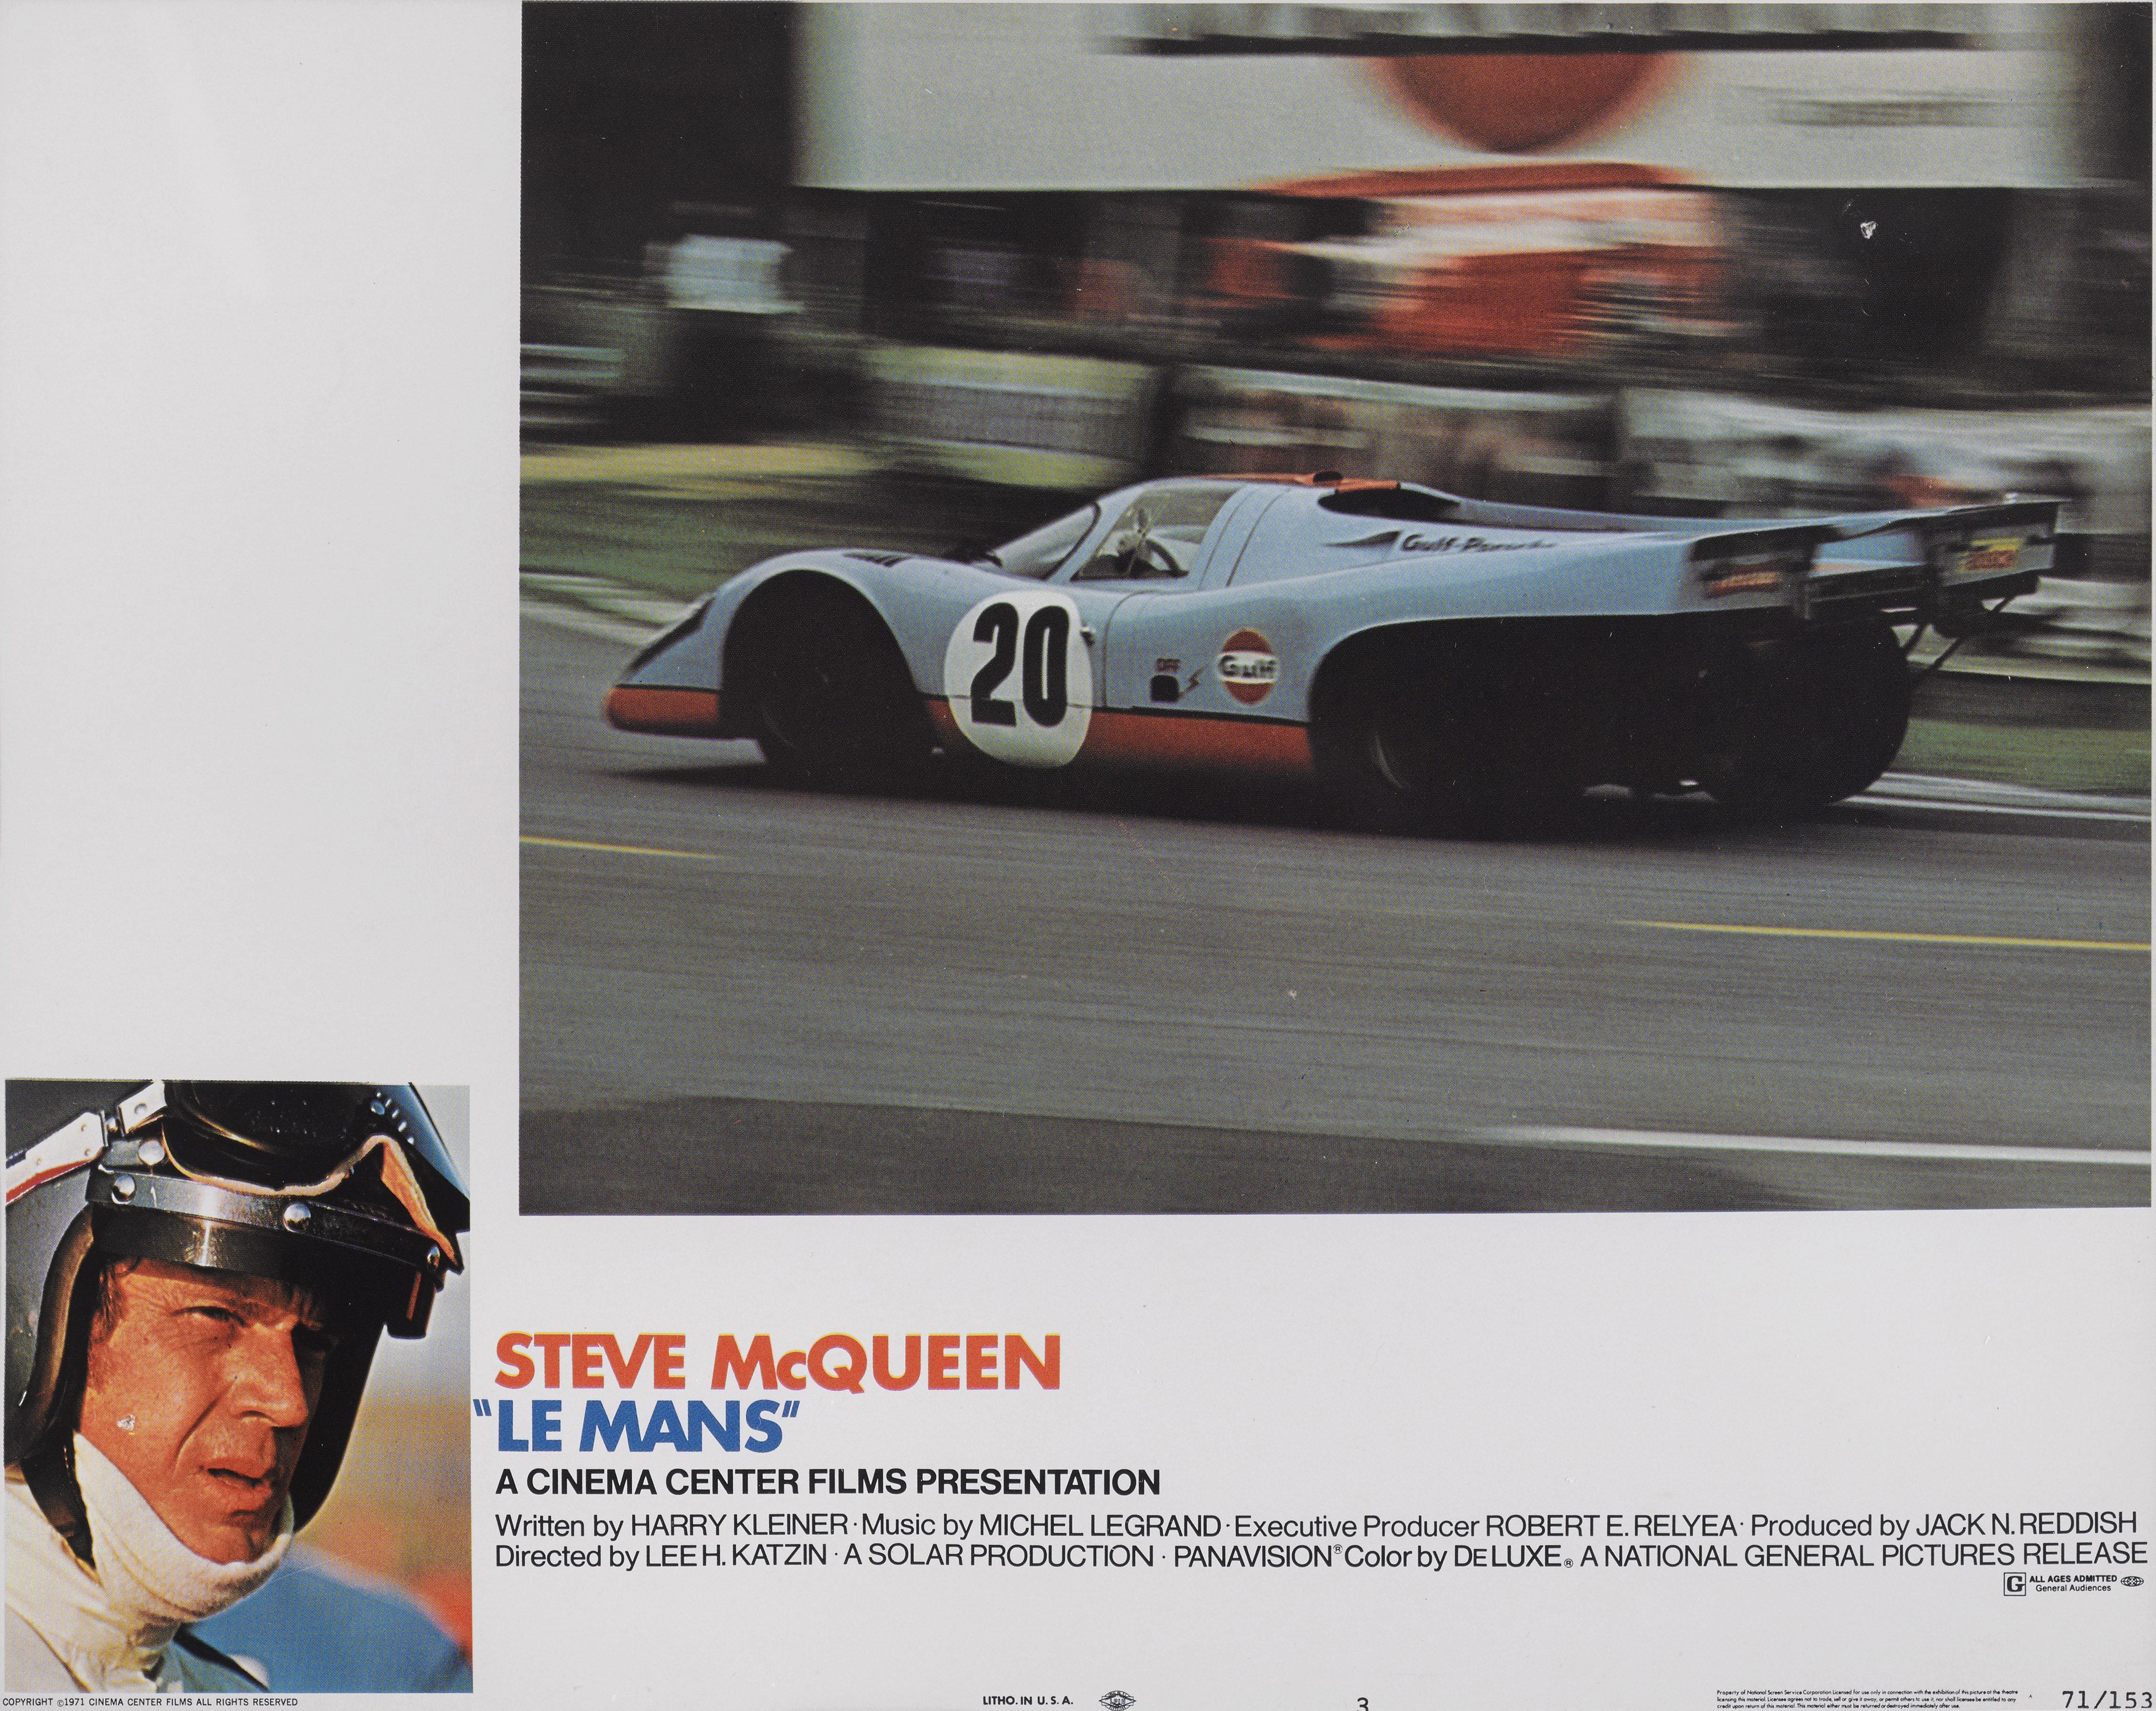 Original US Lobby card for Steve McQueen's 1971 film Le Mans. This card shows the Porsche 908 K Flunder Spyder which was his personal car. This film, directed by Lee H. Katzin, portrays the famous Le Mans 24 Hour endurance motor race, and stars